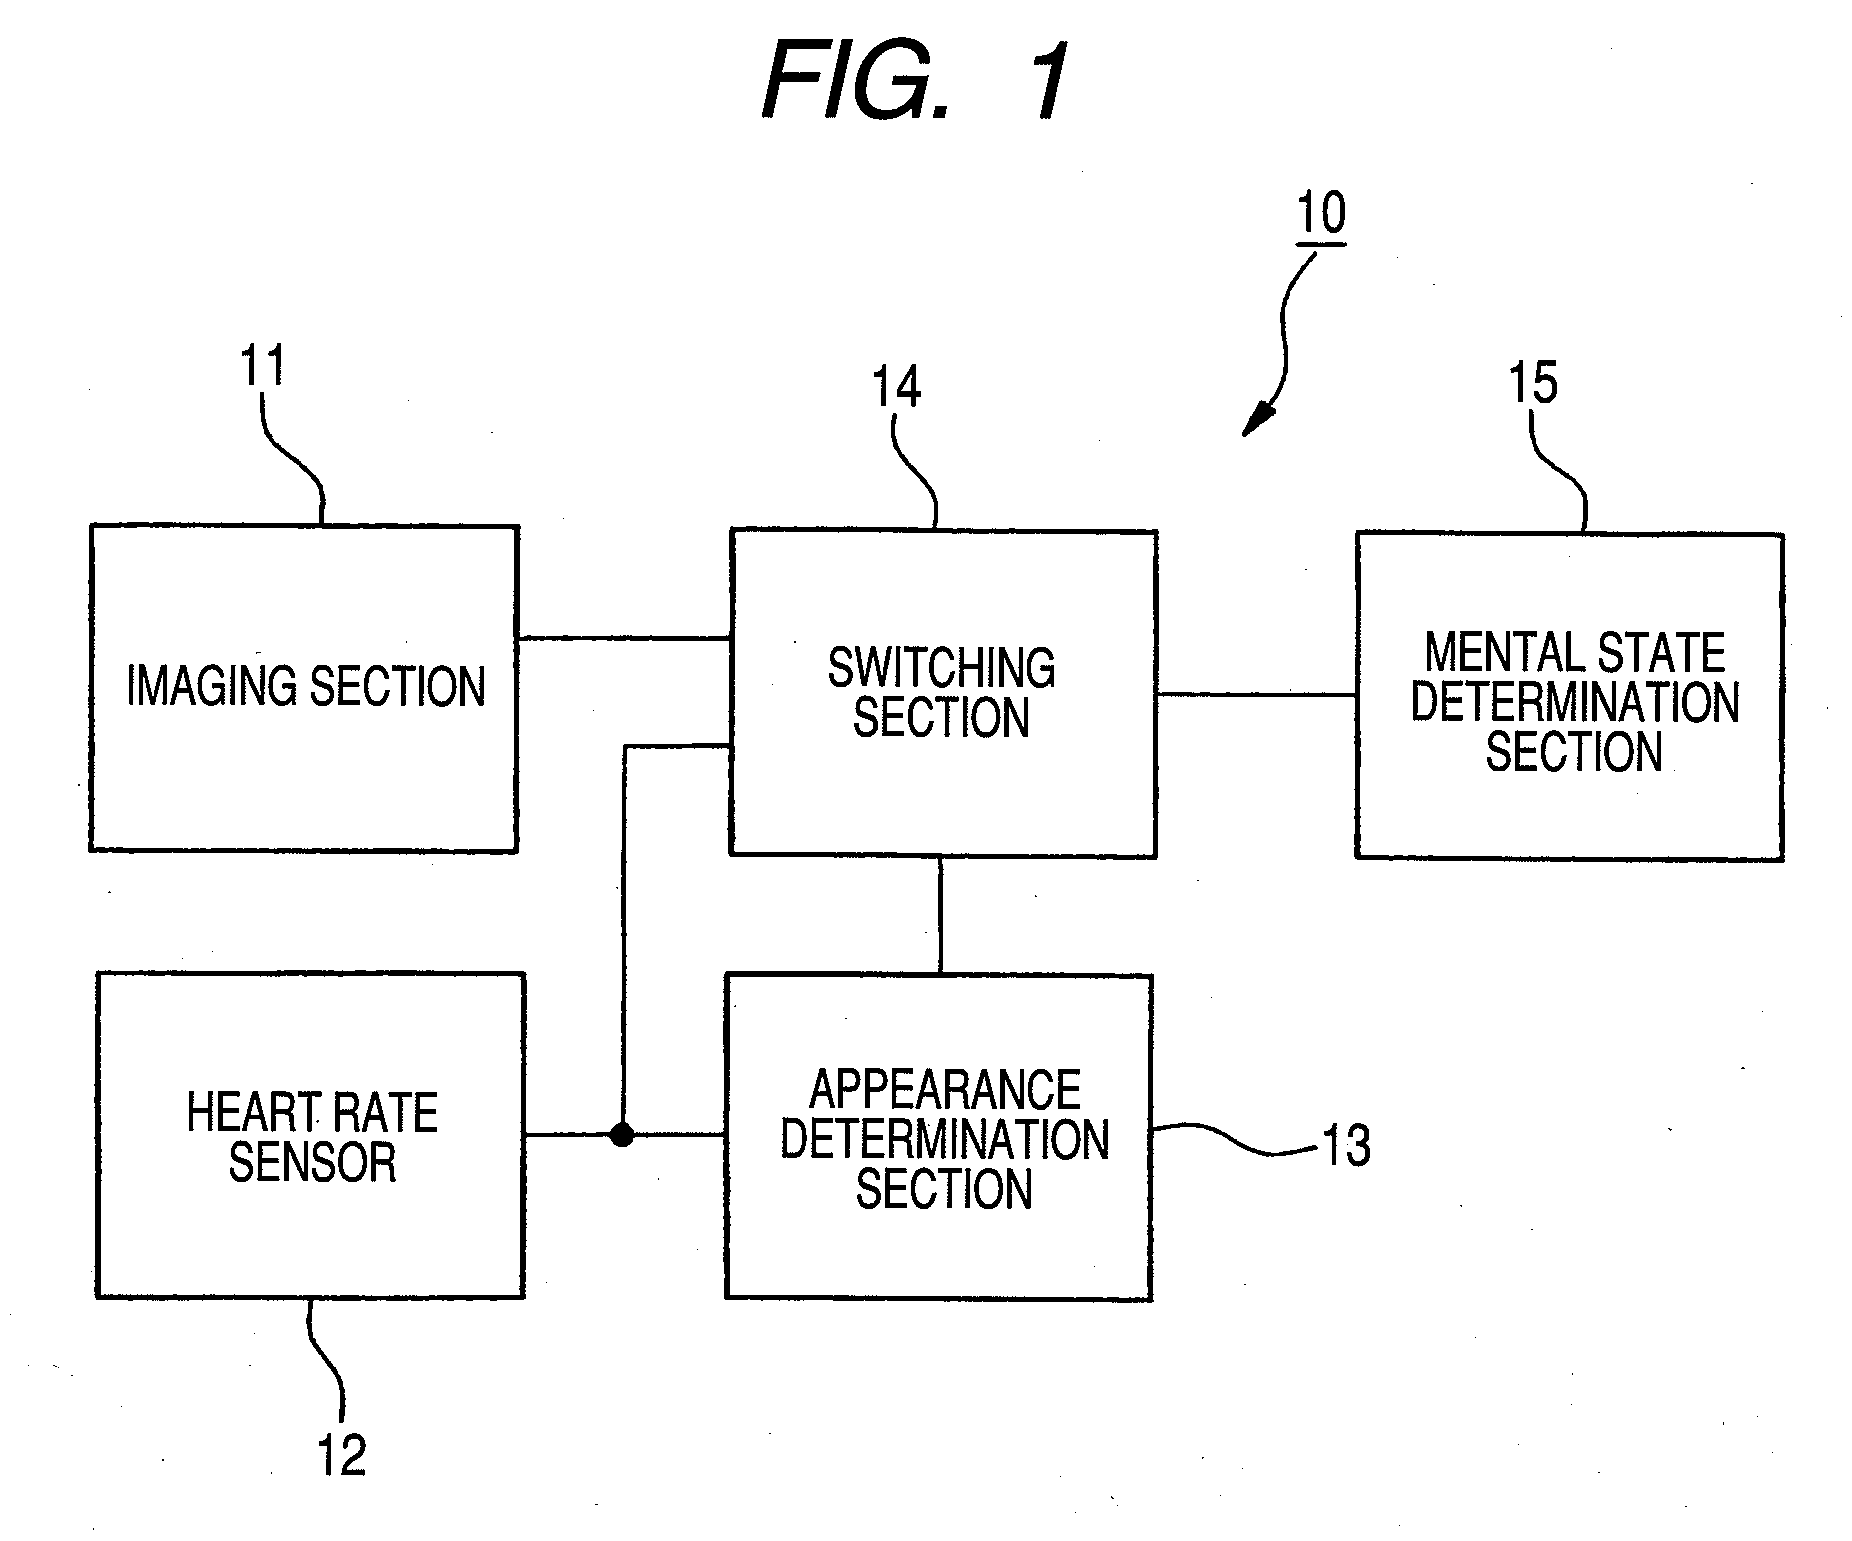 Apparatus for detecting driver's mental state and method for detecting mental state